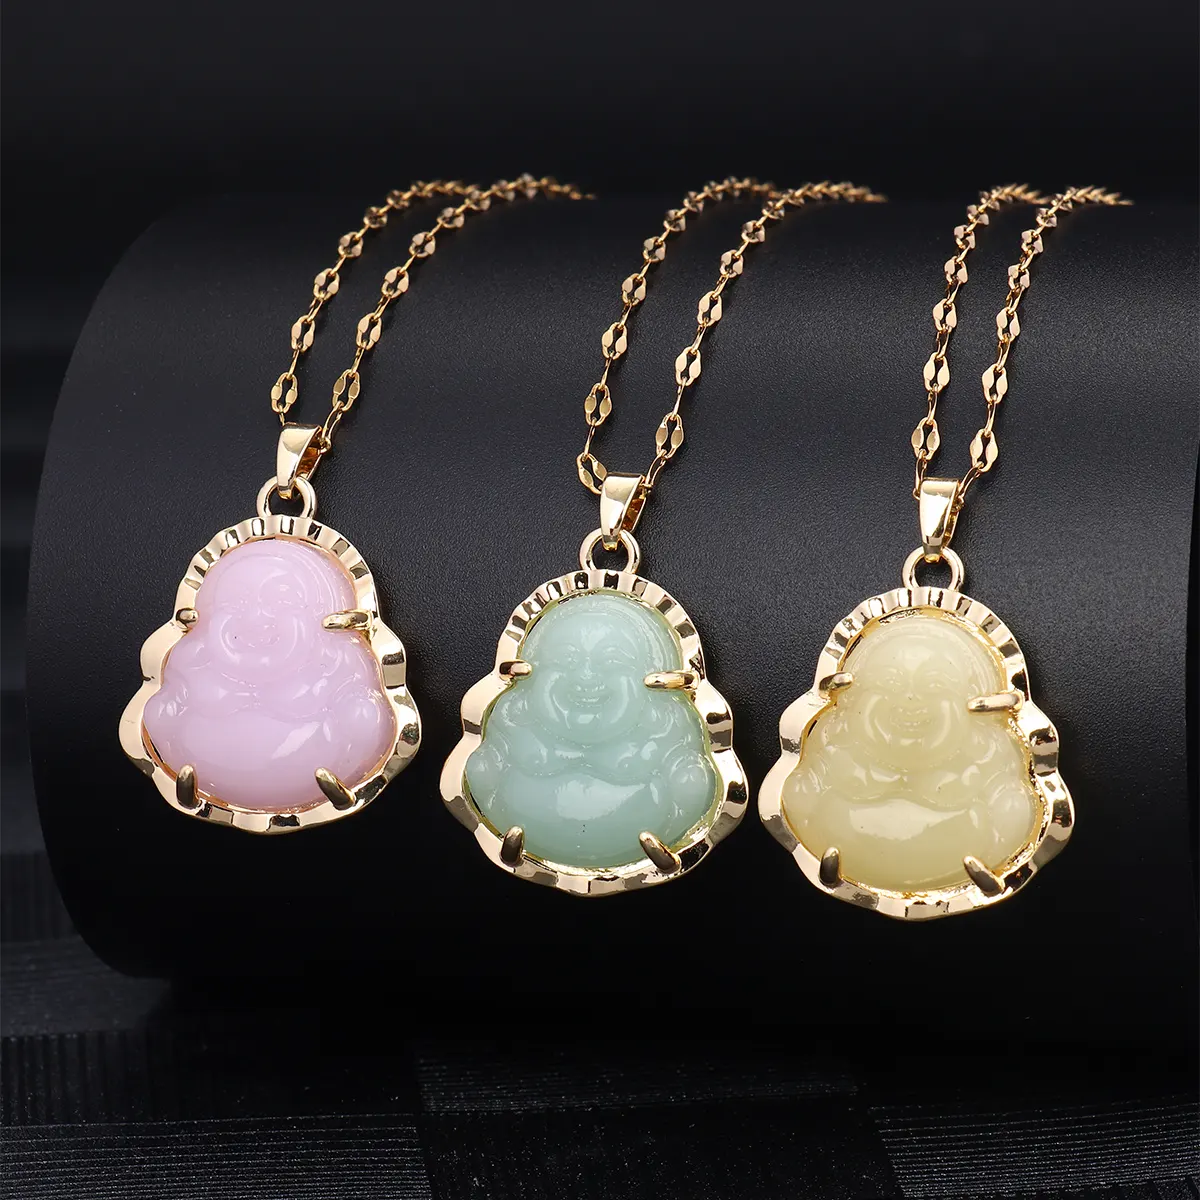 Fashionable Hotsale Gold Plated Pink Jade Buddha Necklace Stainless Steel Chain Laughing Head Pendant Necklace Jewelry